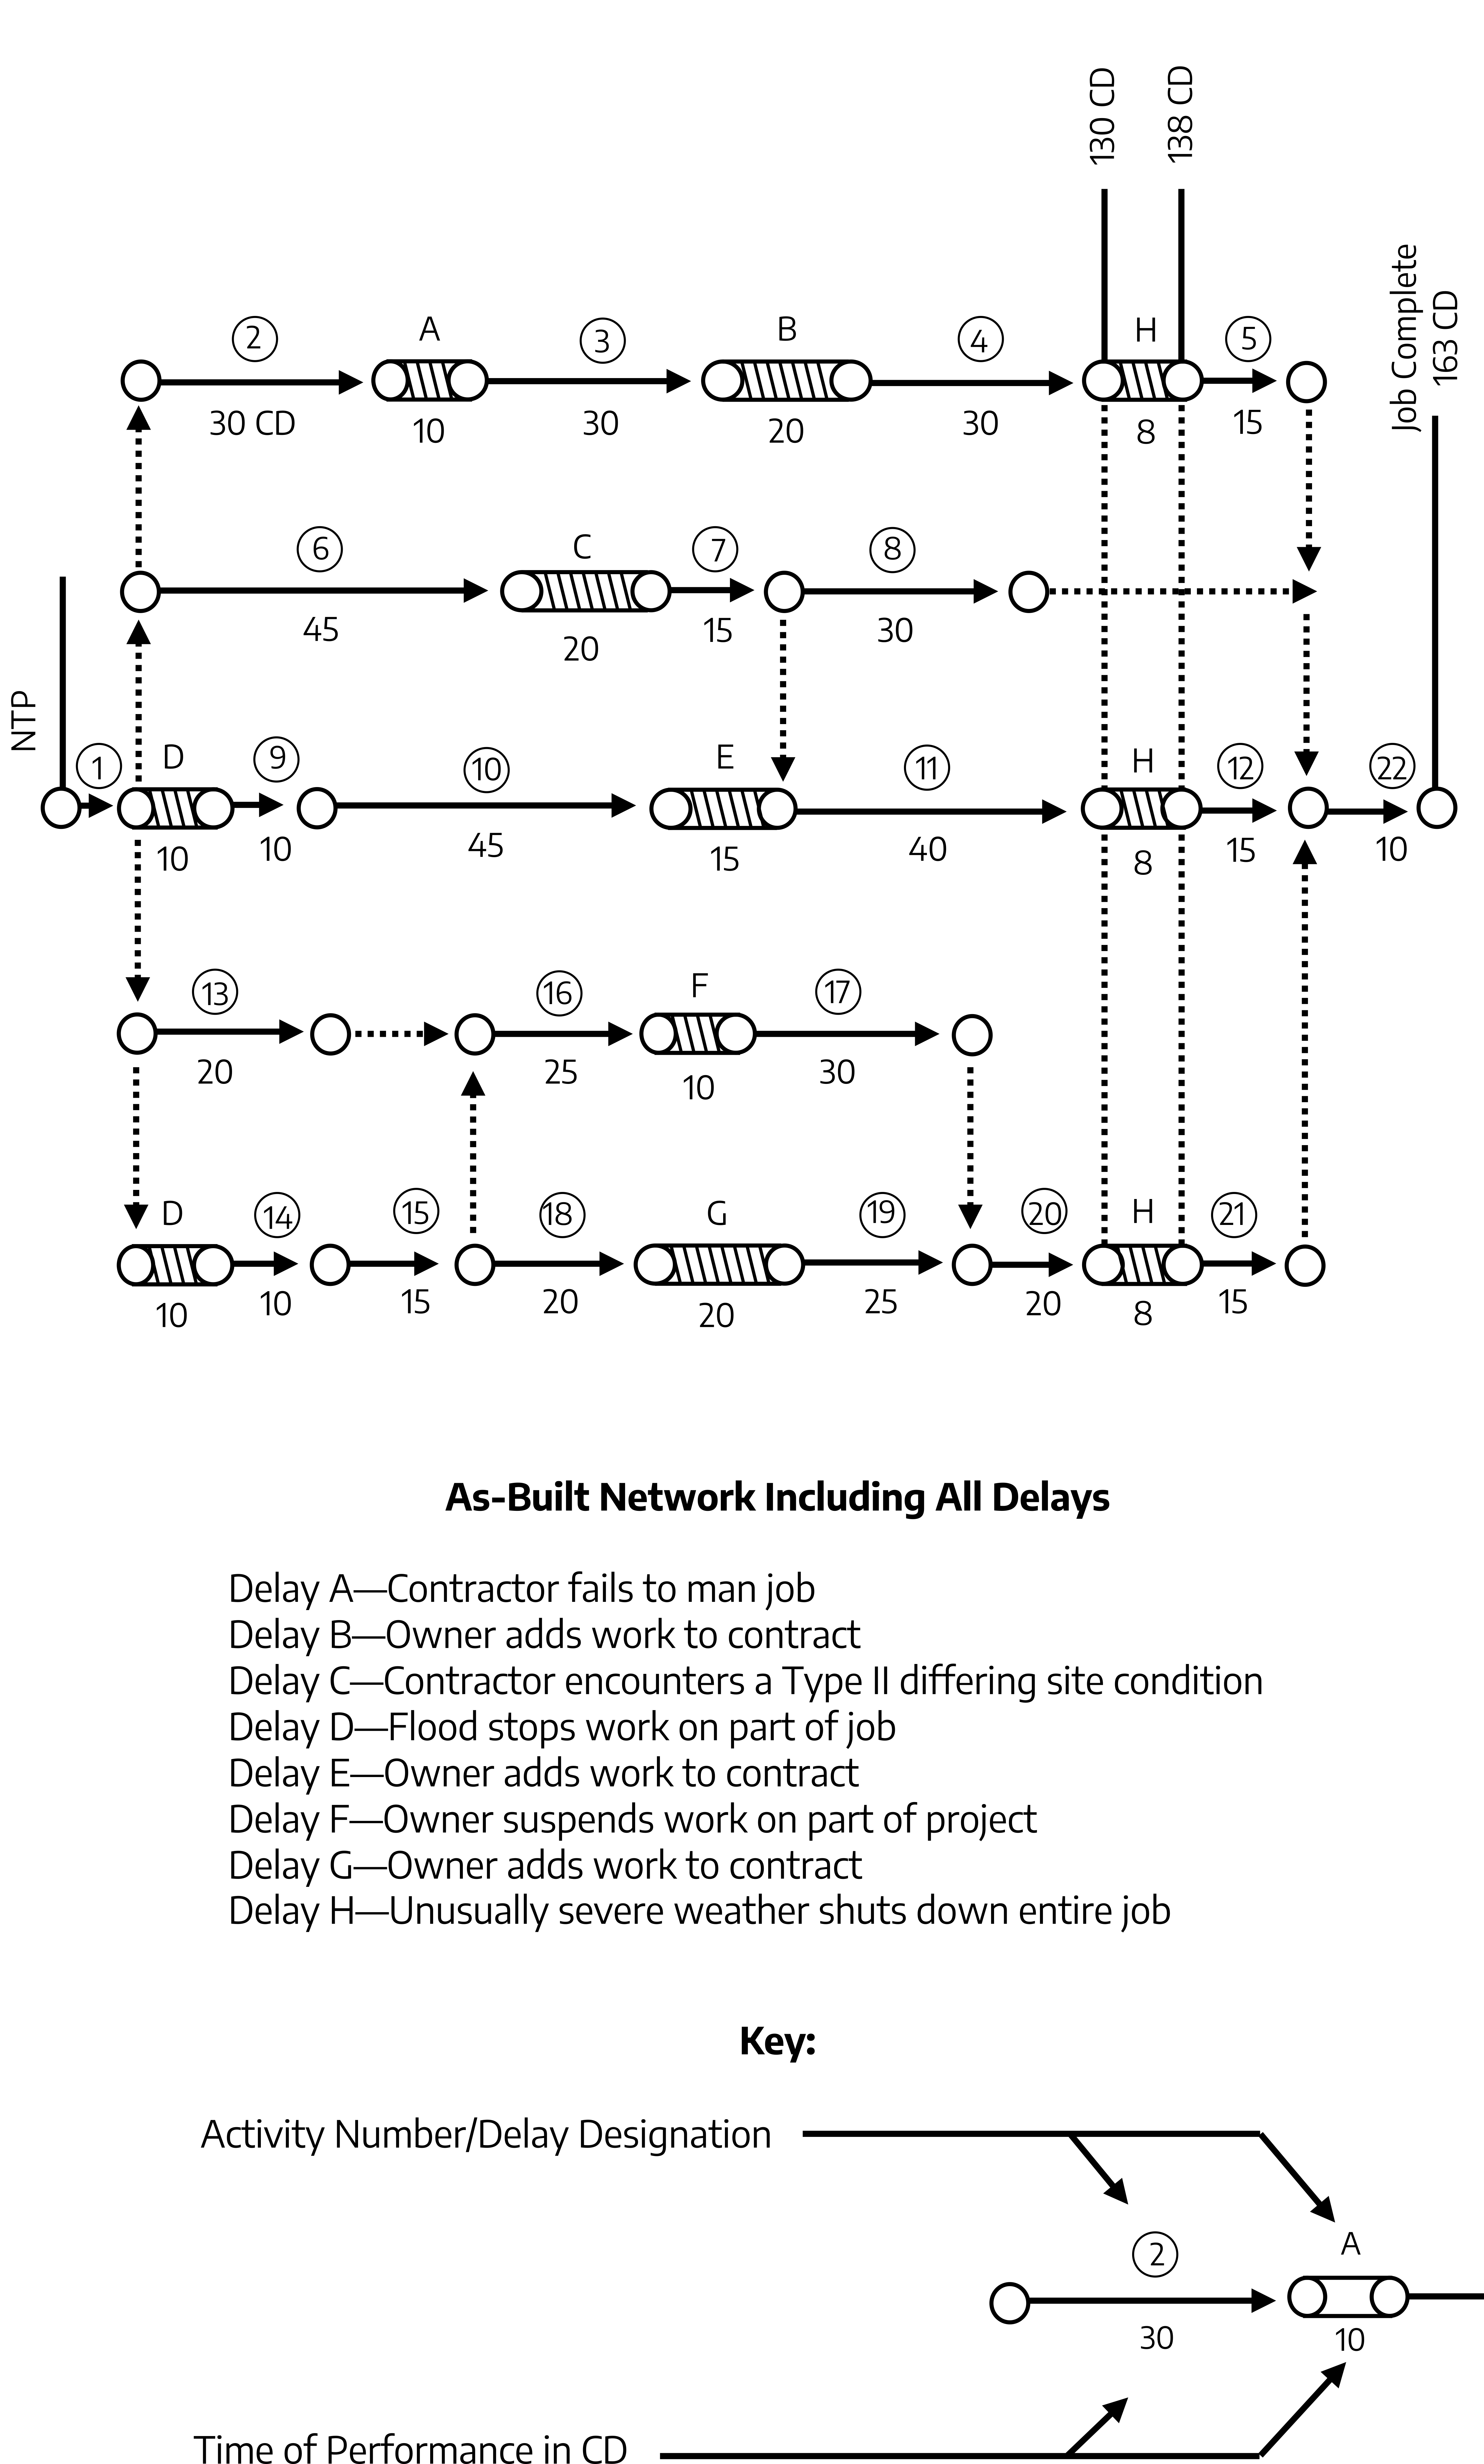 Three-part figure. Top: linear timeline similar to previous ones. Middle: As-built network including all delays. Bottom: Key. Part 1: Linear timeline with 5 horizontal lines. Main middle line: NTP, 1 (10 CD) arrow D (10) arrow 9 (10) arrow 10 (45) arrow E (15) arrow 11 (40) arrow H (8) arrow 12 (15) arrow 22 (10) arrow job complete (163 CD). 1 line above main line: 1 (10) arrow 6 (45) arrow C (20) arrow 7 (15) arrow 8 (30) arrow 22 (10) arrow complete (same as main). 2 lines above main line: NTP arrow 1 (10) arrow 2 (30) arrow A (10) arrow 3 (30) arrow B (20) arrow 4 (30) arrow H (8) arrow 5 (15) arrow 22 (10) arrow job complete (same as main). 1 line below main: 1 (10) arrow 13 (20) arrow 16 (25) arrow F (10) arrow 17 (30). 2 lines below main: 1 (10) arrow D (10) arrow 14 (10) arrow 15 (15) arrow 18 (20) arrow G (20) arrow 19 (25) arrow 20 (20) arrow H (8) arrow 21 (15) arrow 22 (10) arrow job complete (same as main). Part 2: Delay A (Contractor fails to man job), Delay B (Owner adds work to contract), Delay C (Contractor encounters a Type II differing site condition), Delay D (Flood stops work on part of job), Delay E (Owner adds work to contract), Delay F (Owner suspends work on part of project), Delay G (Owner adds work to contract), Delay H (Unusually severe weather shuts down entire job). Part 3: Key. Top: activity number/delay designation. Bottom: Time of performance in CD. Middle: 2 (30) arrow A (10).